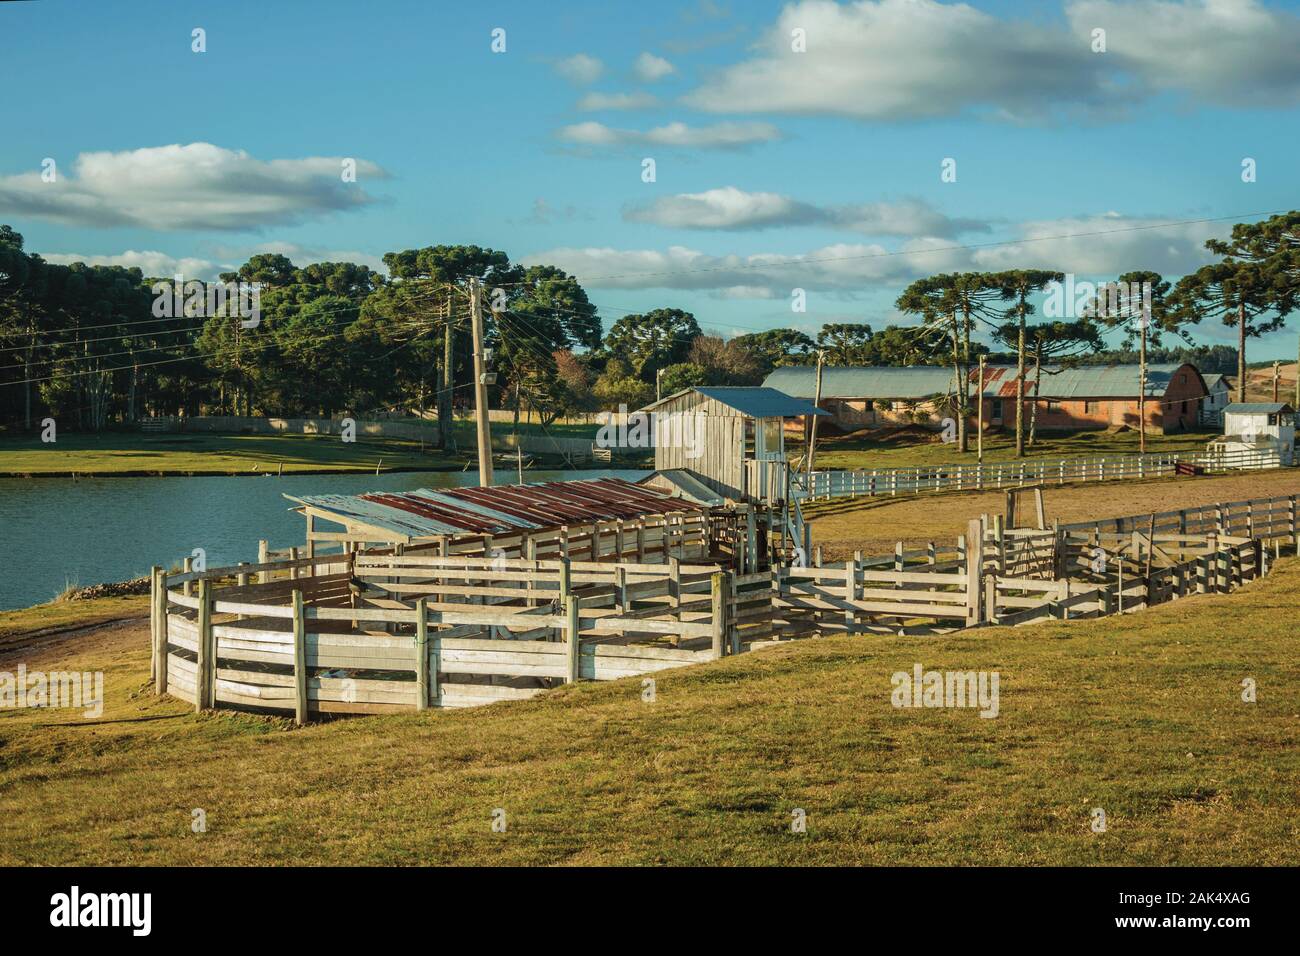 Farm with fences, livestock sheds and blue lake near Cambara do Sul. A town with natural tourist sights in southern Brazil. Stock Photo